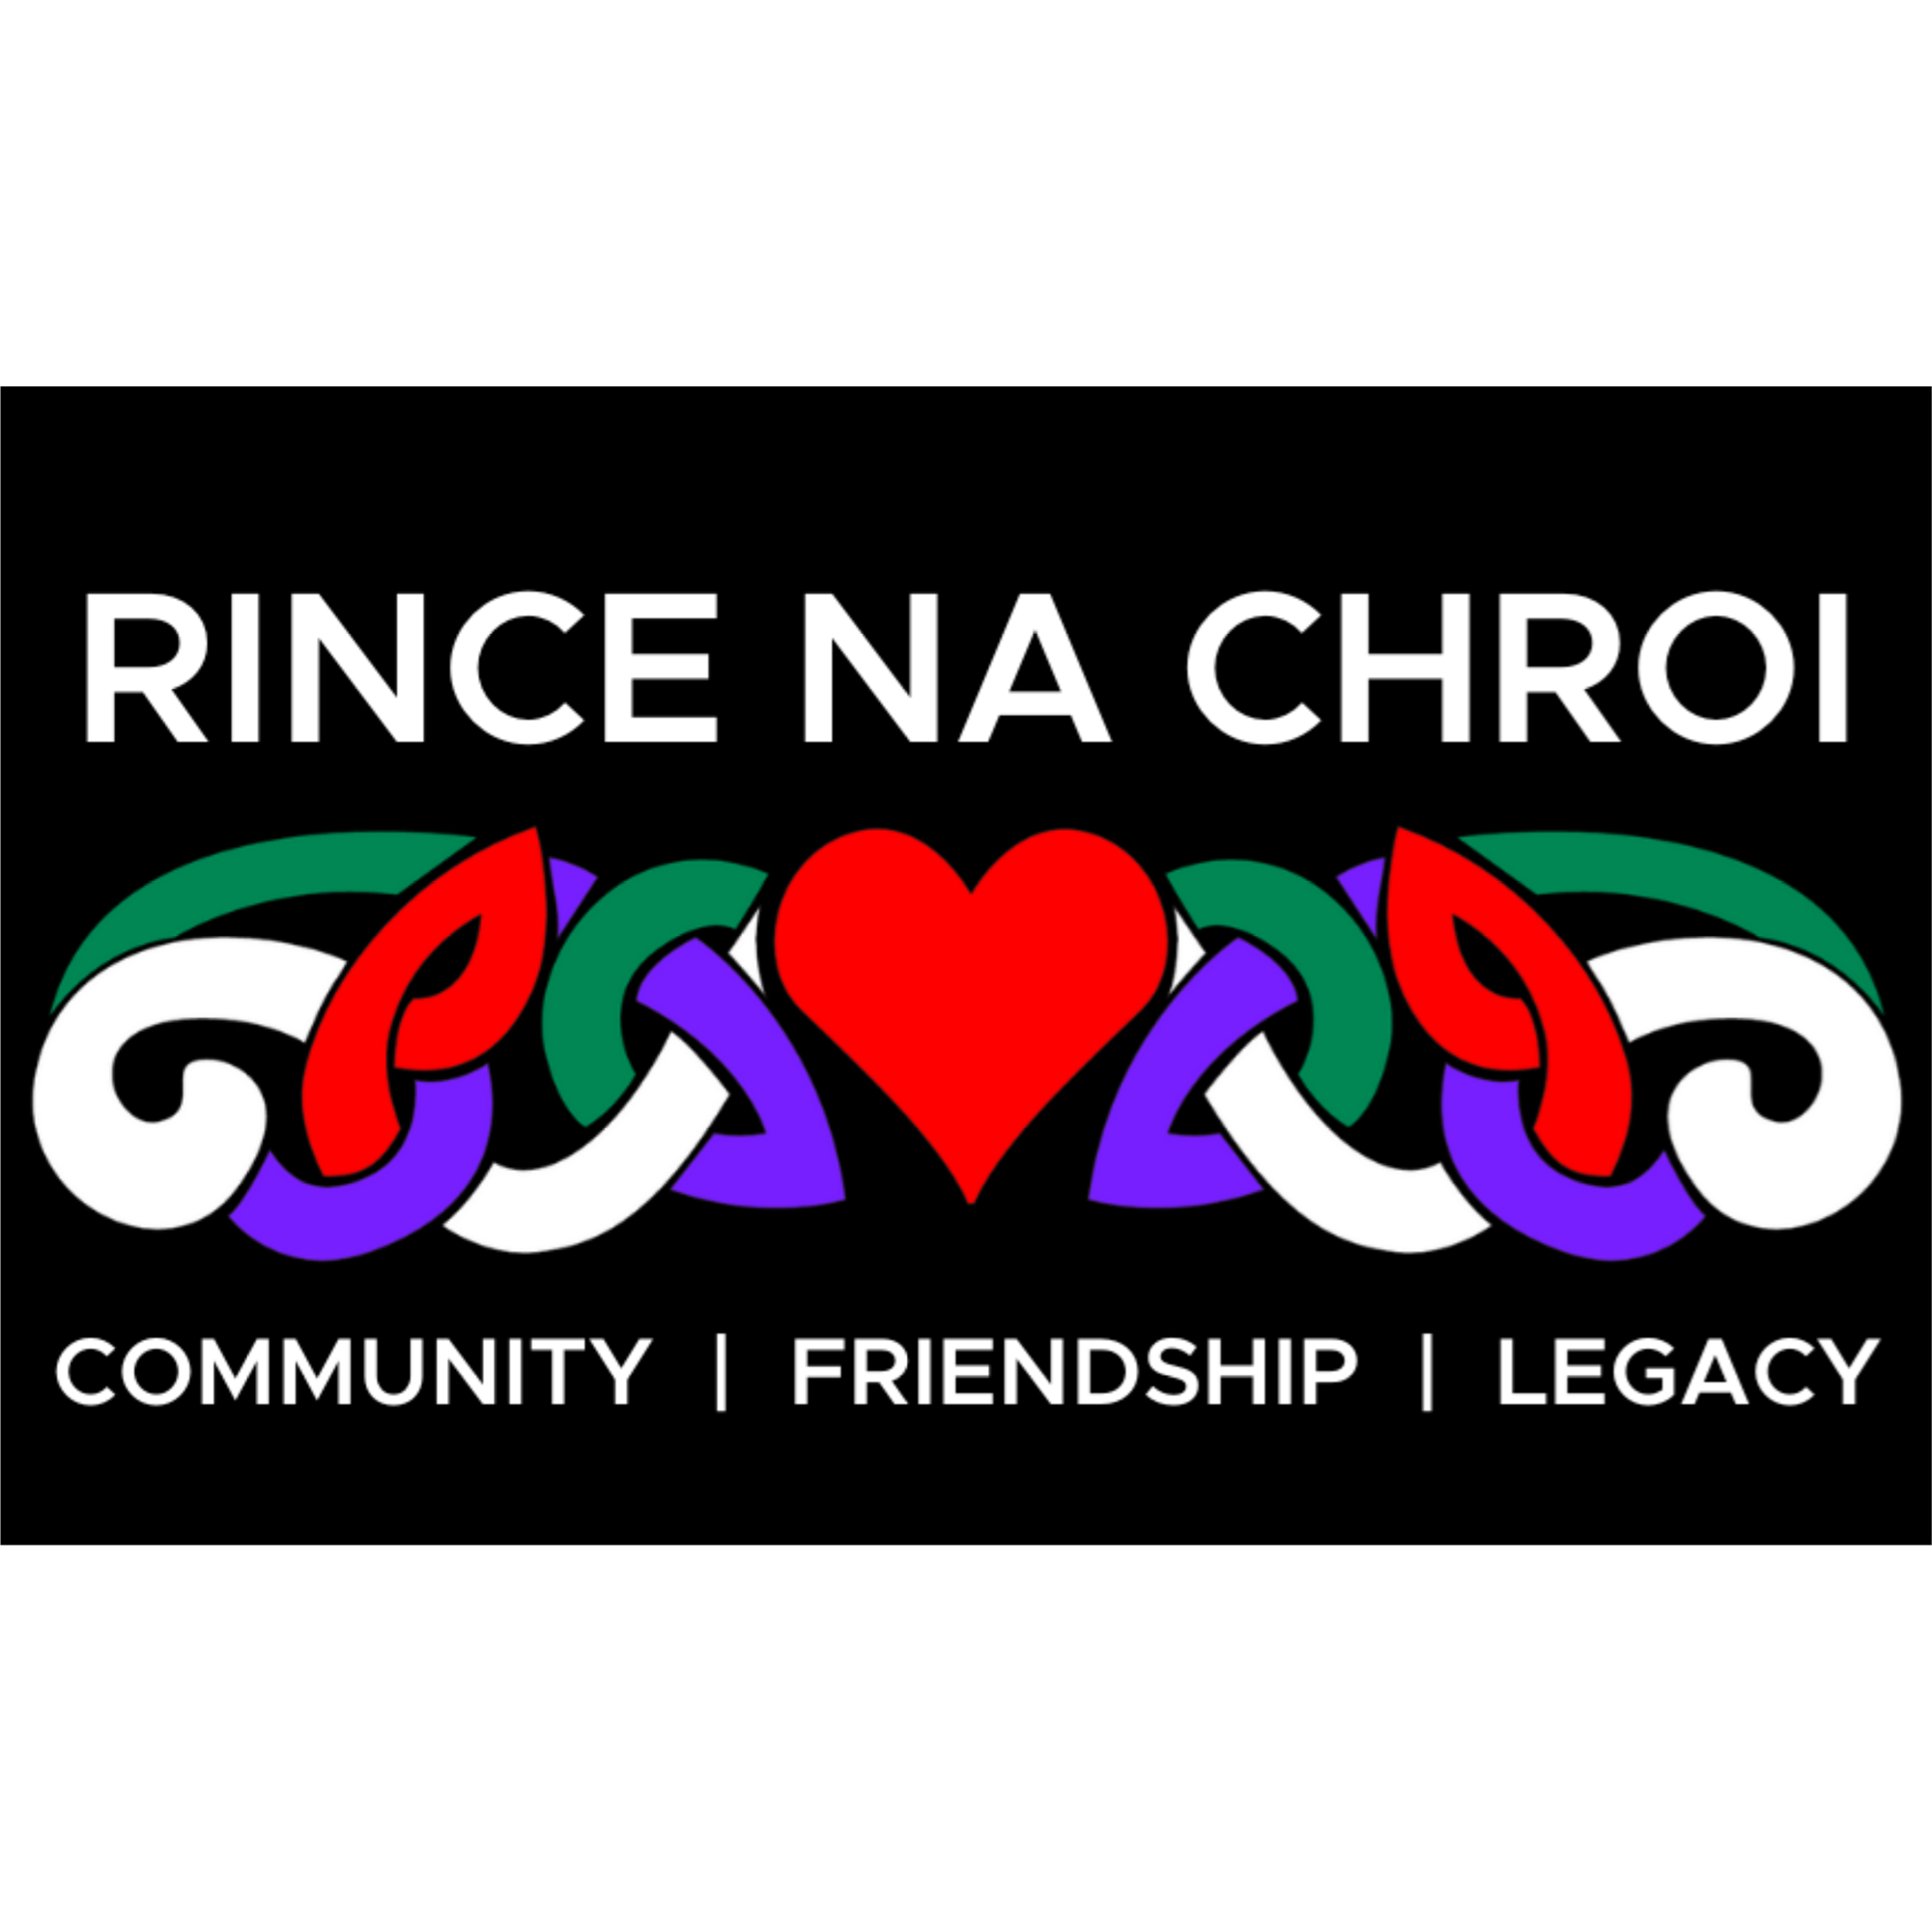 More about Rince na Chroi